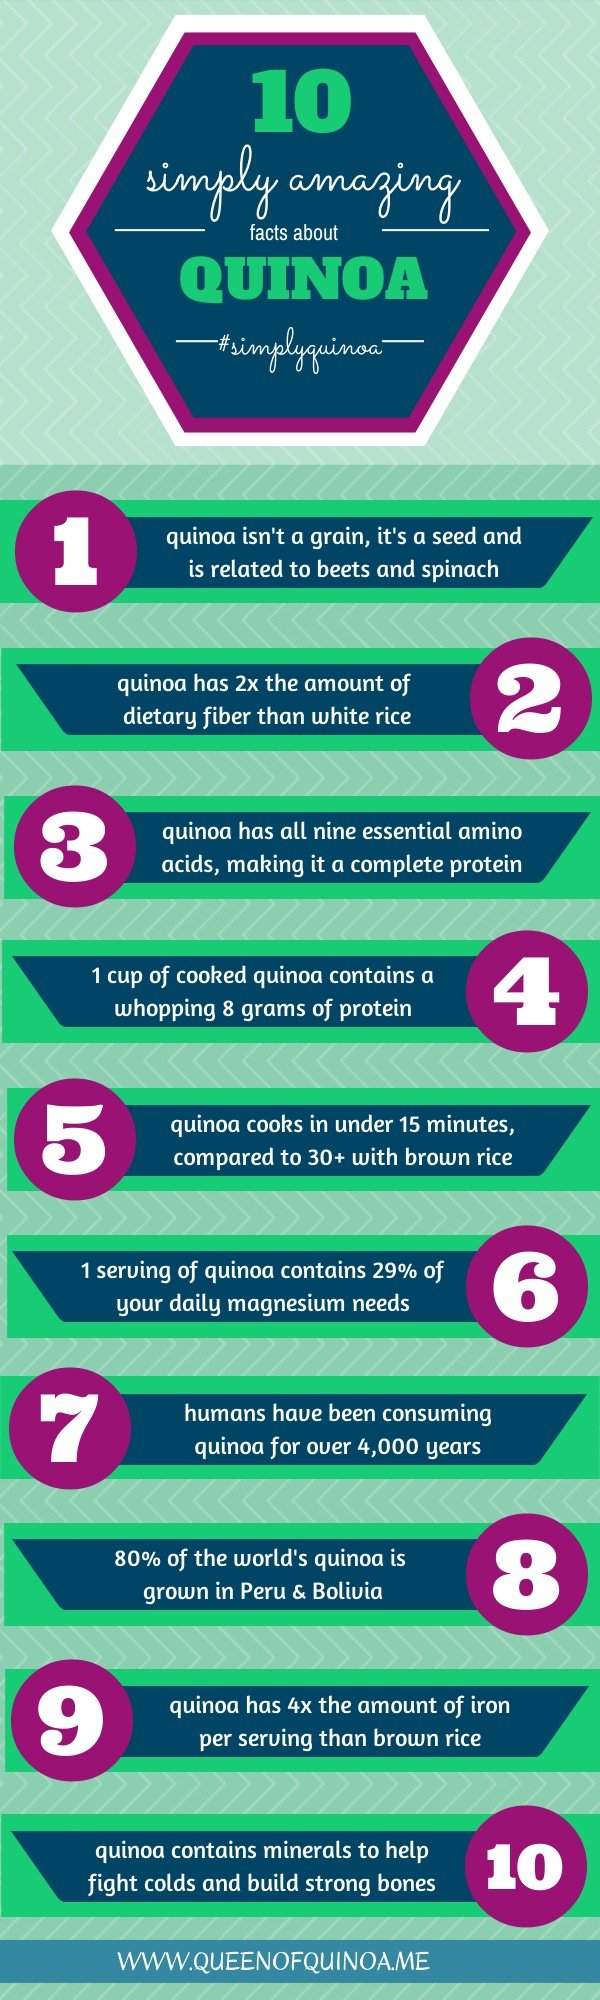 10 Simply Amazing Facts about Quinoa and why this #glutenfree food is so special